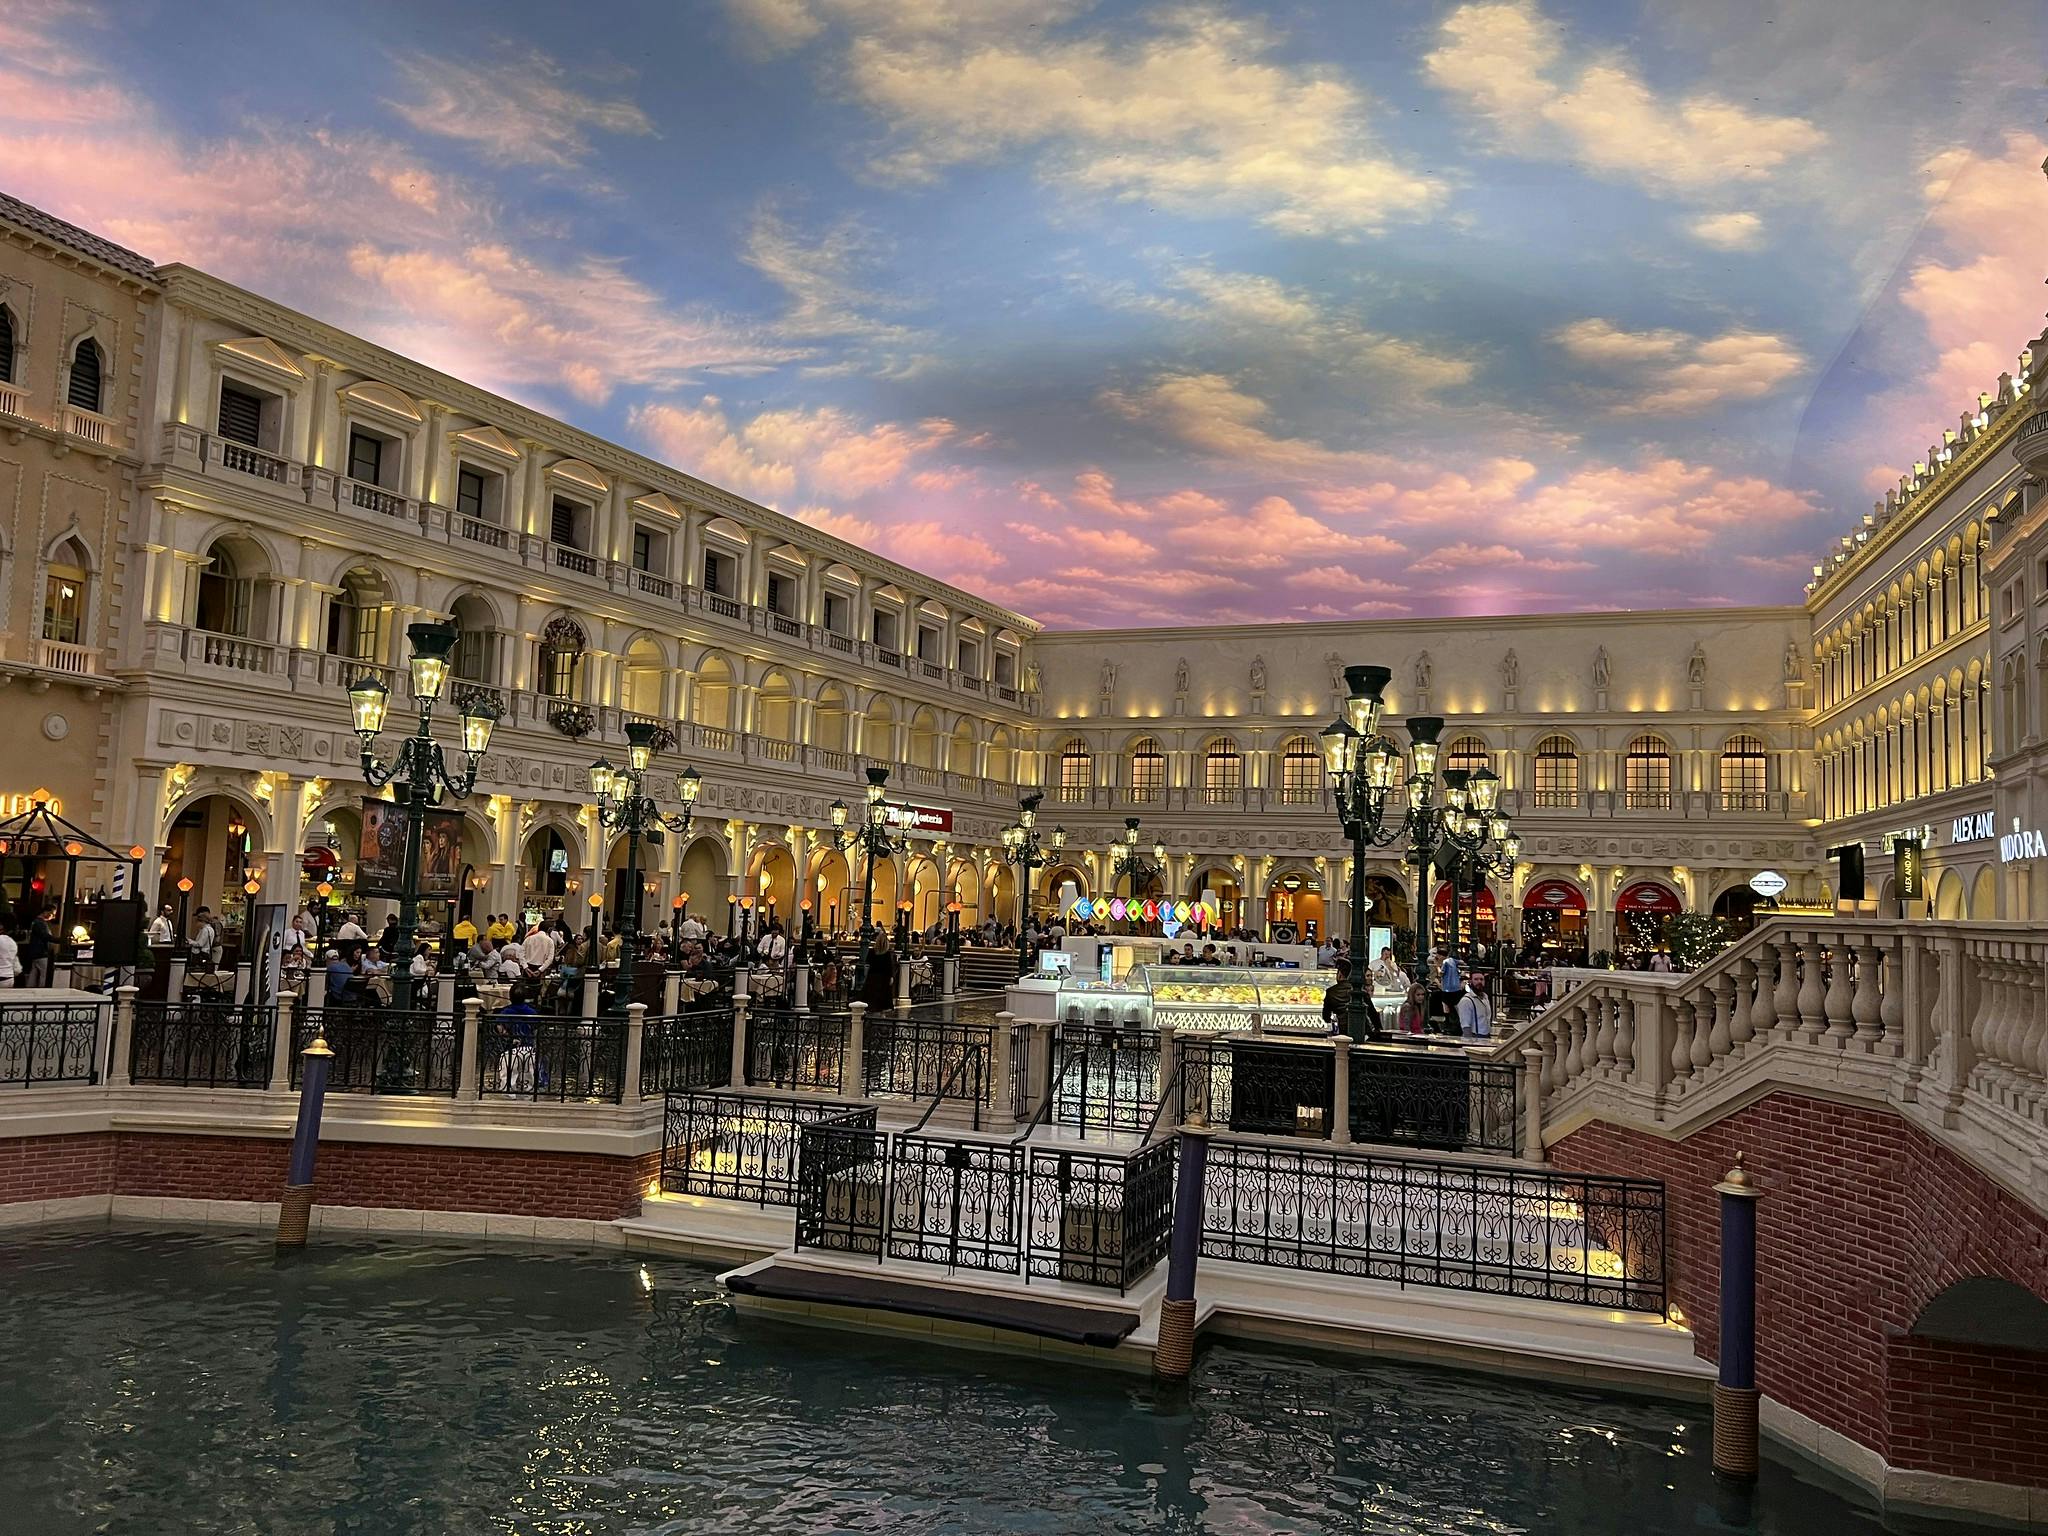 RIOS has been selected for a $1 billion redesign of The Venetian